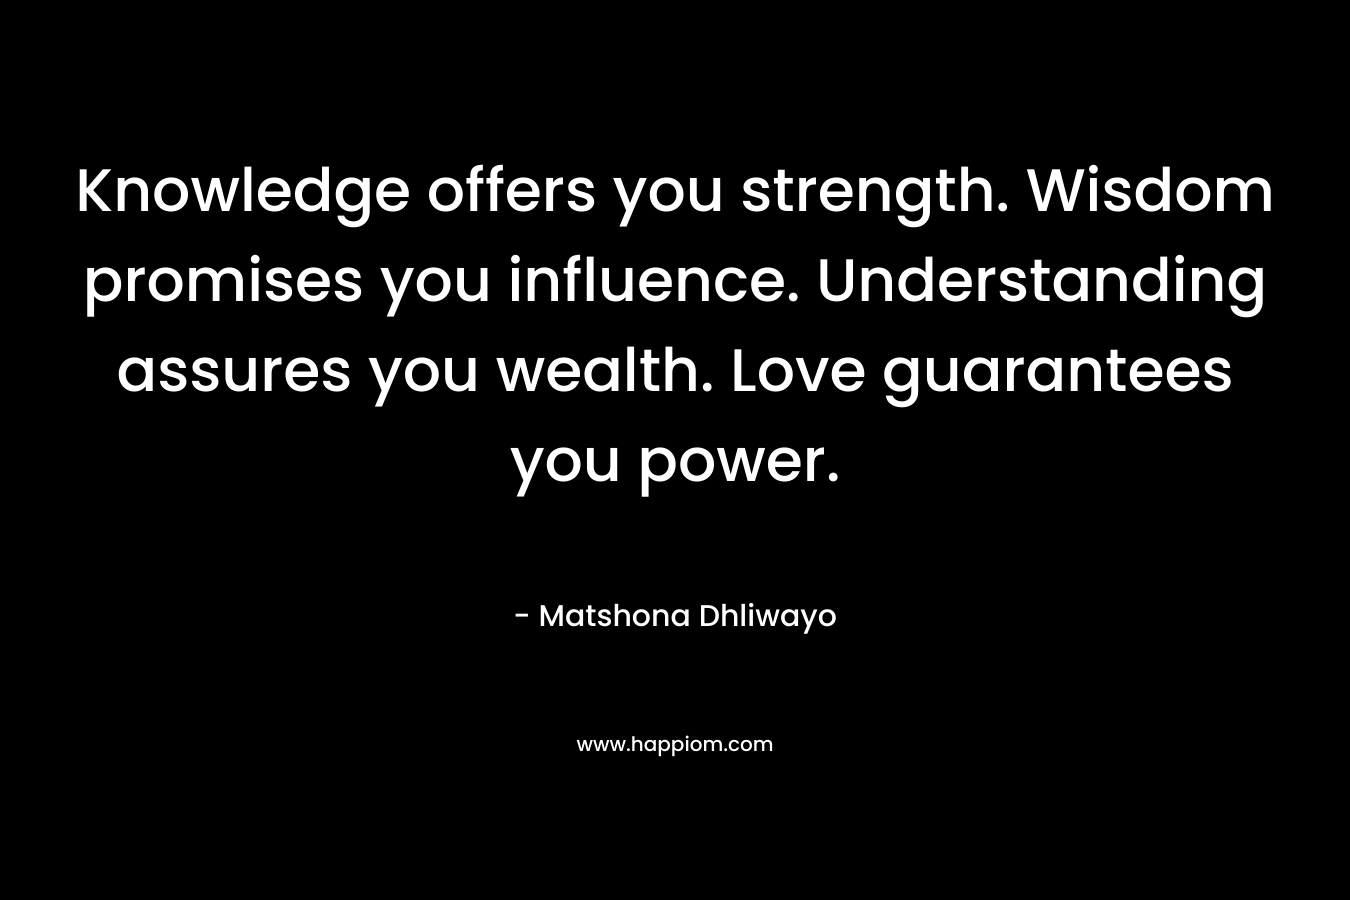 Knowledge offers you strength. Wisdom promises you influence. Understanding assures you wealth. Love guarantees you power.